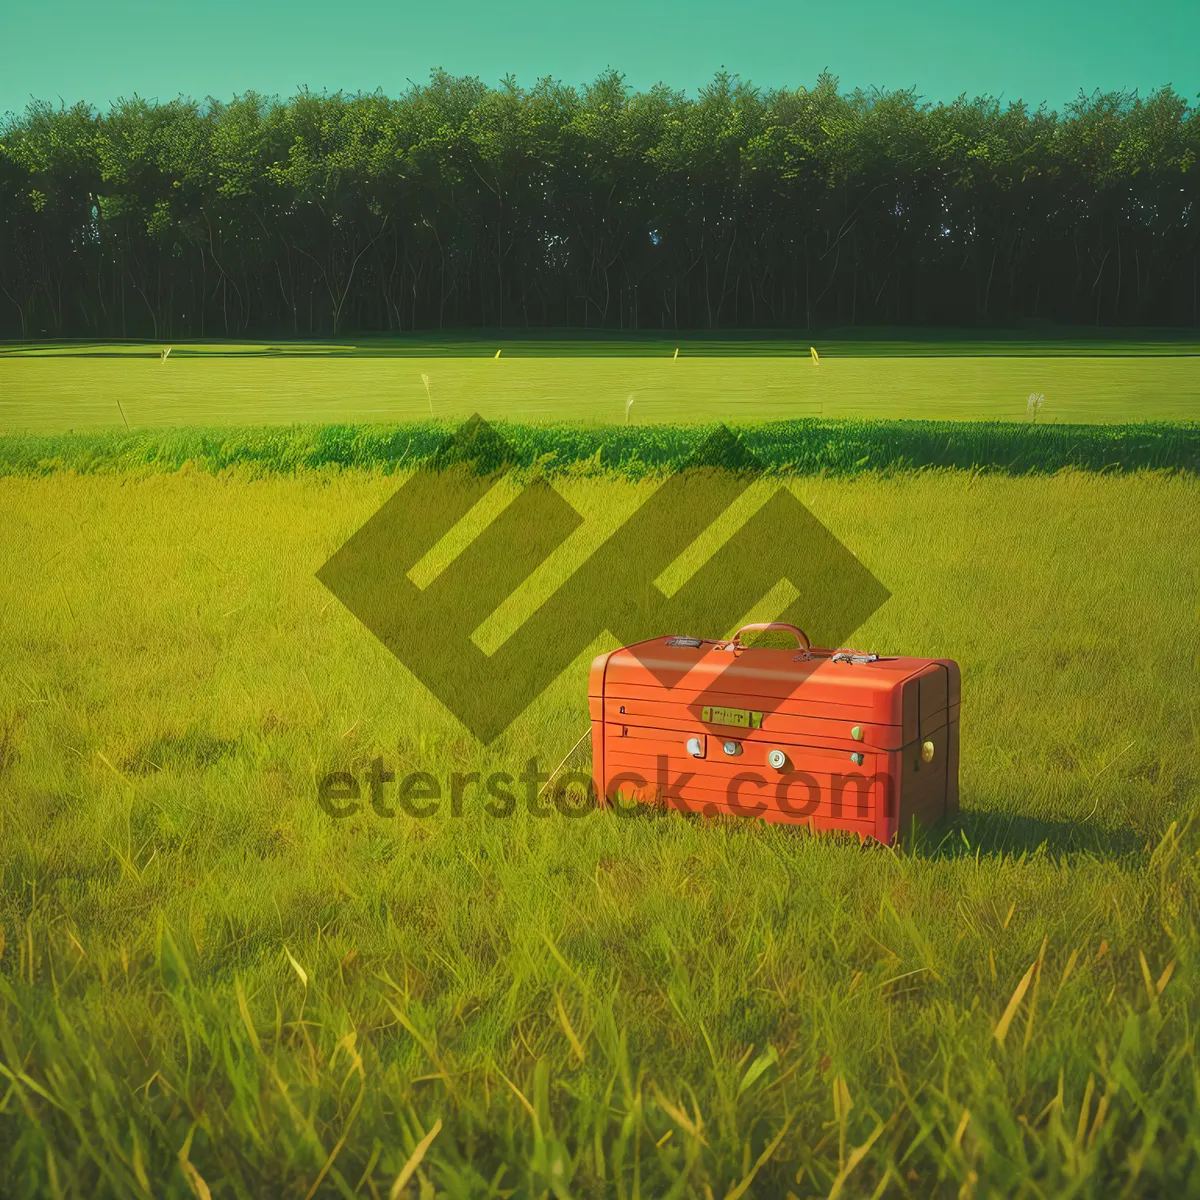 Picture of Sunlit Rice Field Skyline Surrounded by Greenery